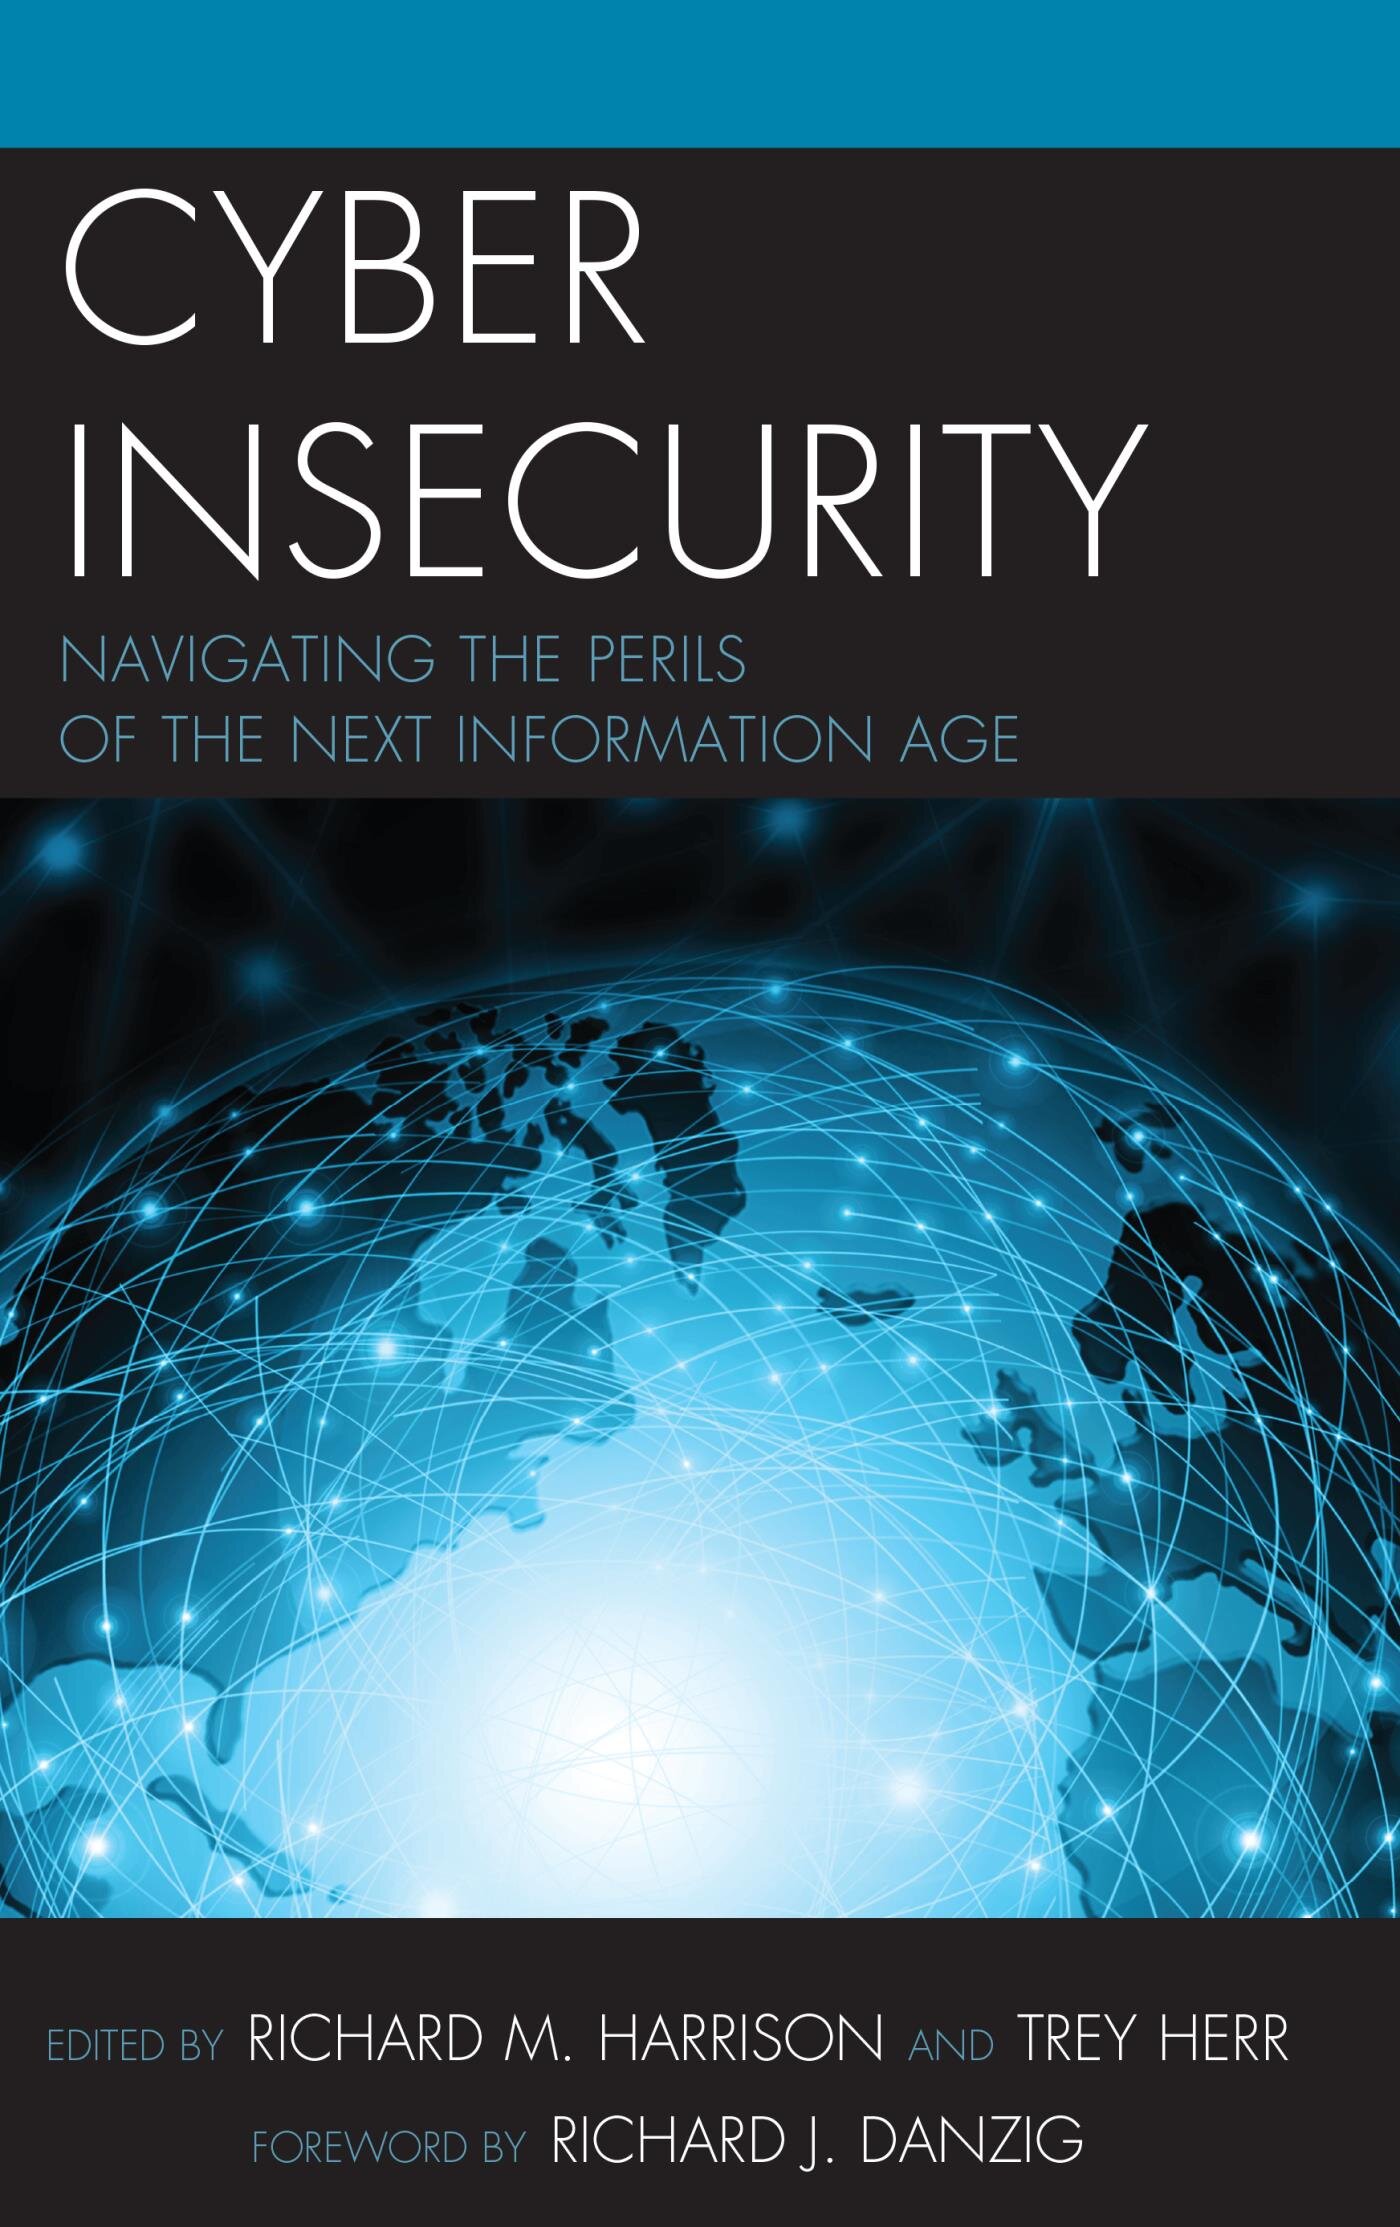 Cyber Insecurity: Navigating the Perils of the Next Information Age ...